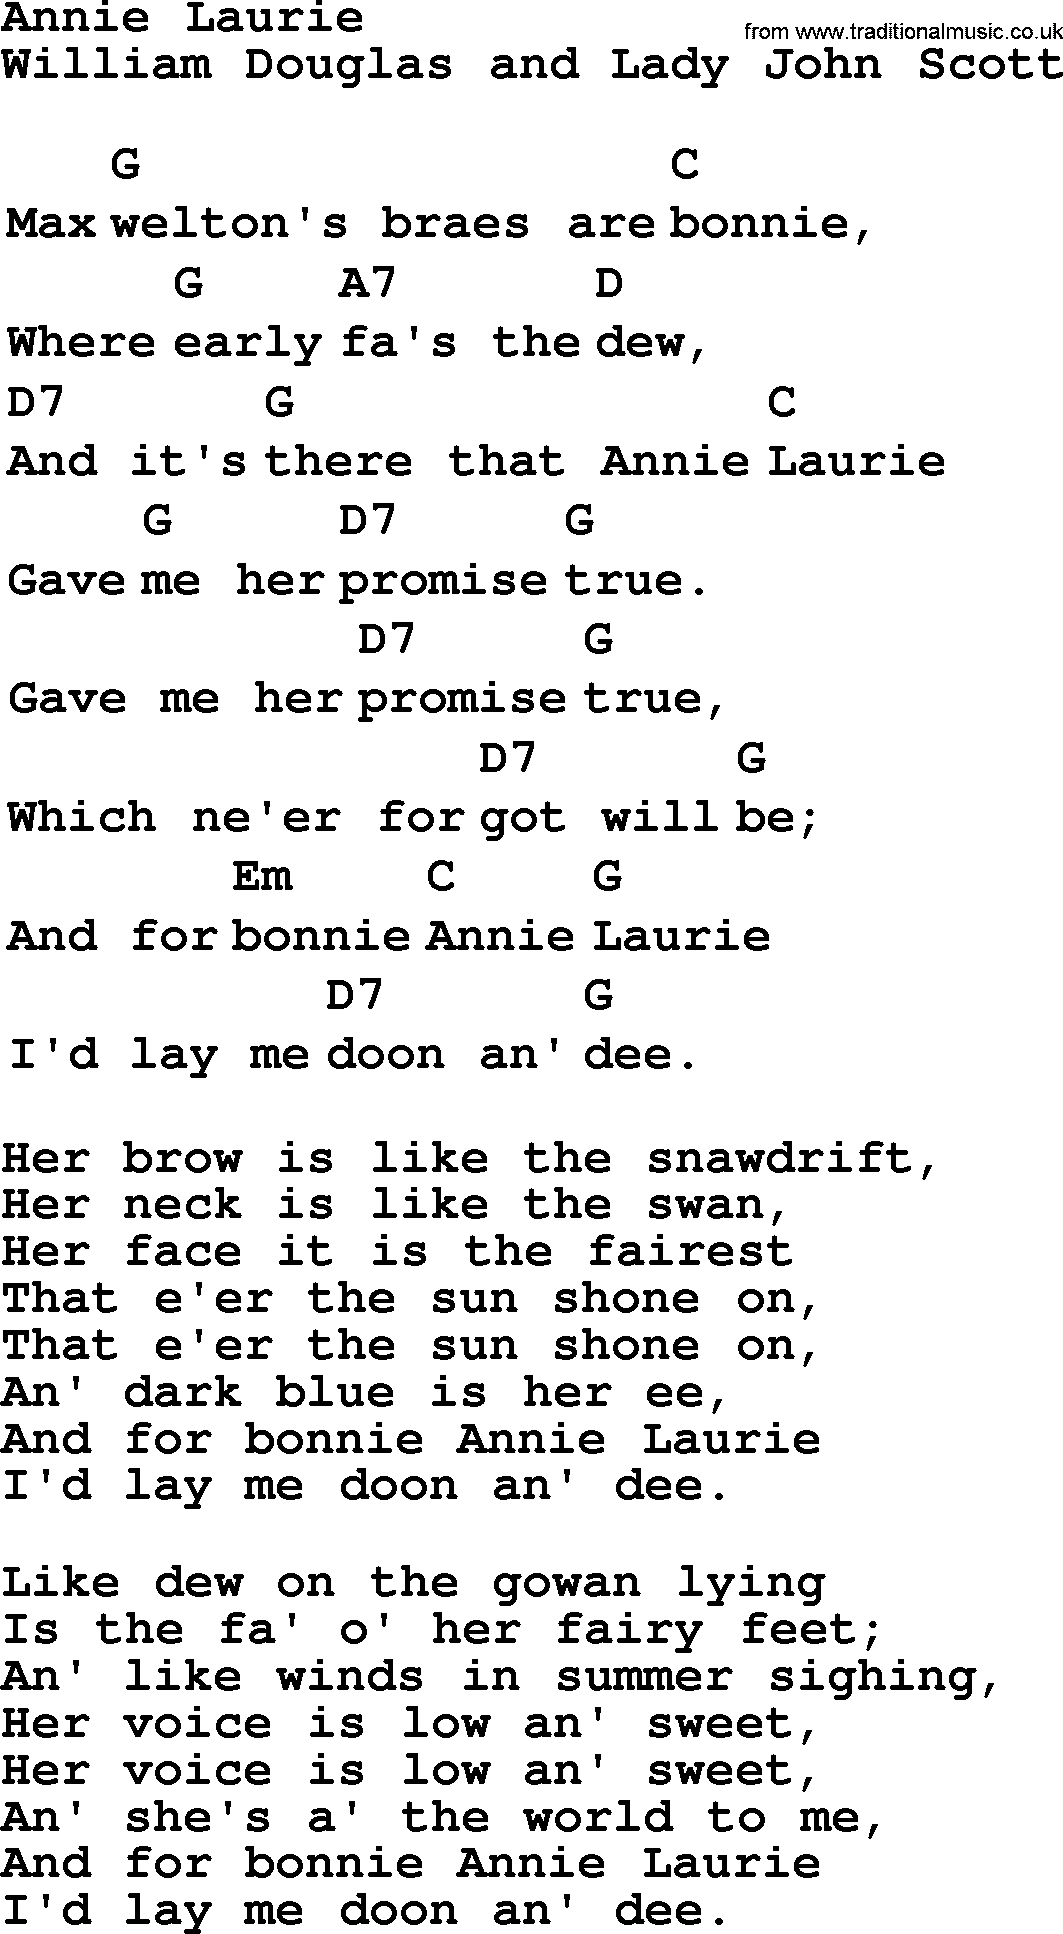 Top 1000 Most Popular Folk and Old-time Songs: Annie Laurie, lyrics and chords